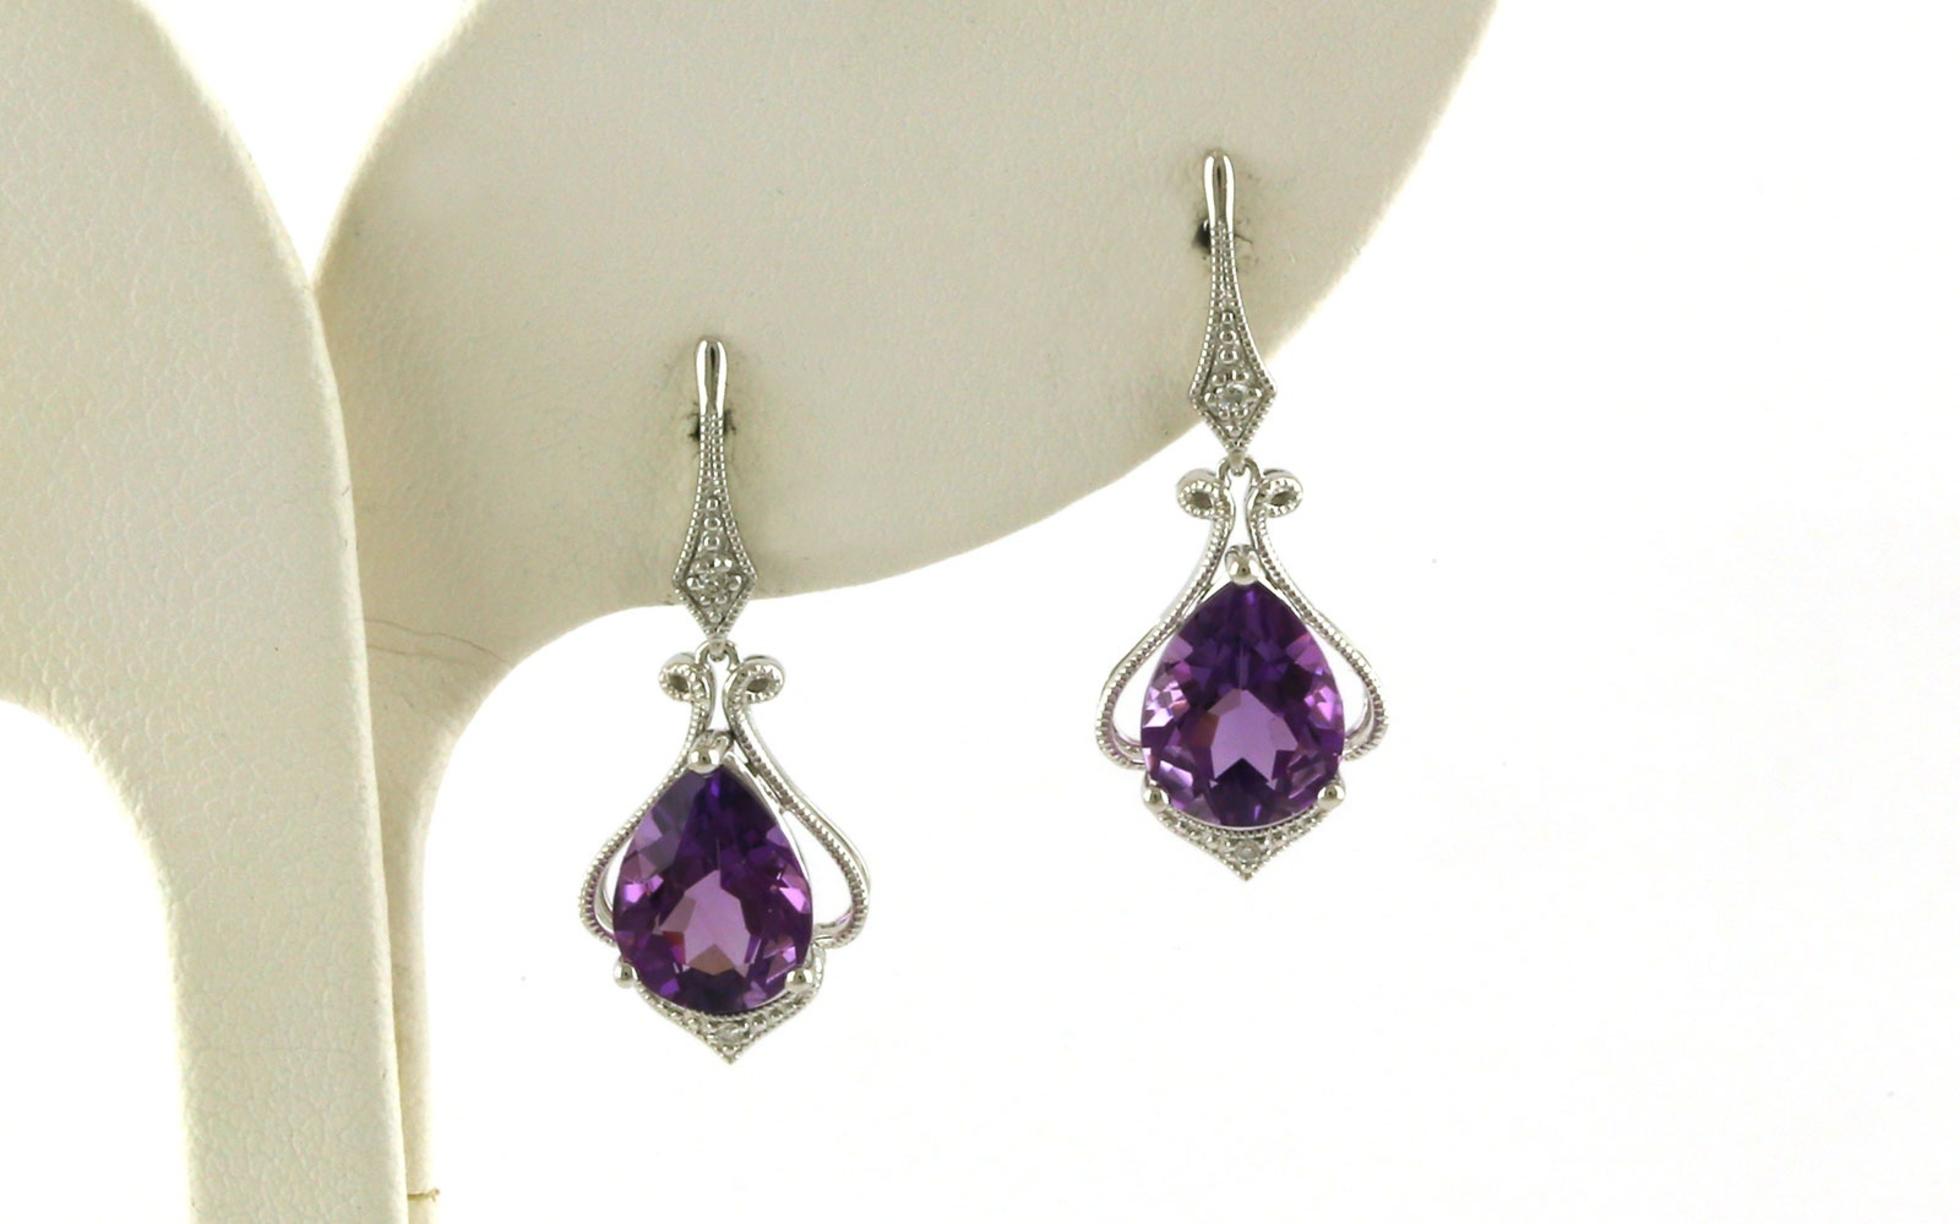 Vintage-Style Drop Earrings in White Gold (3.06cts TWT)